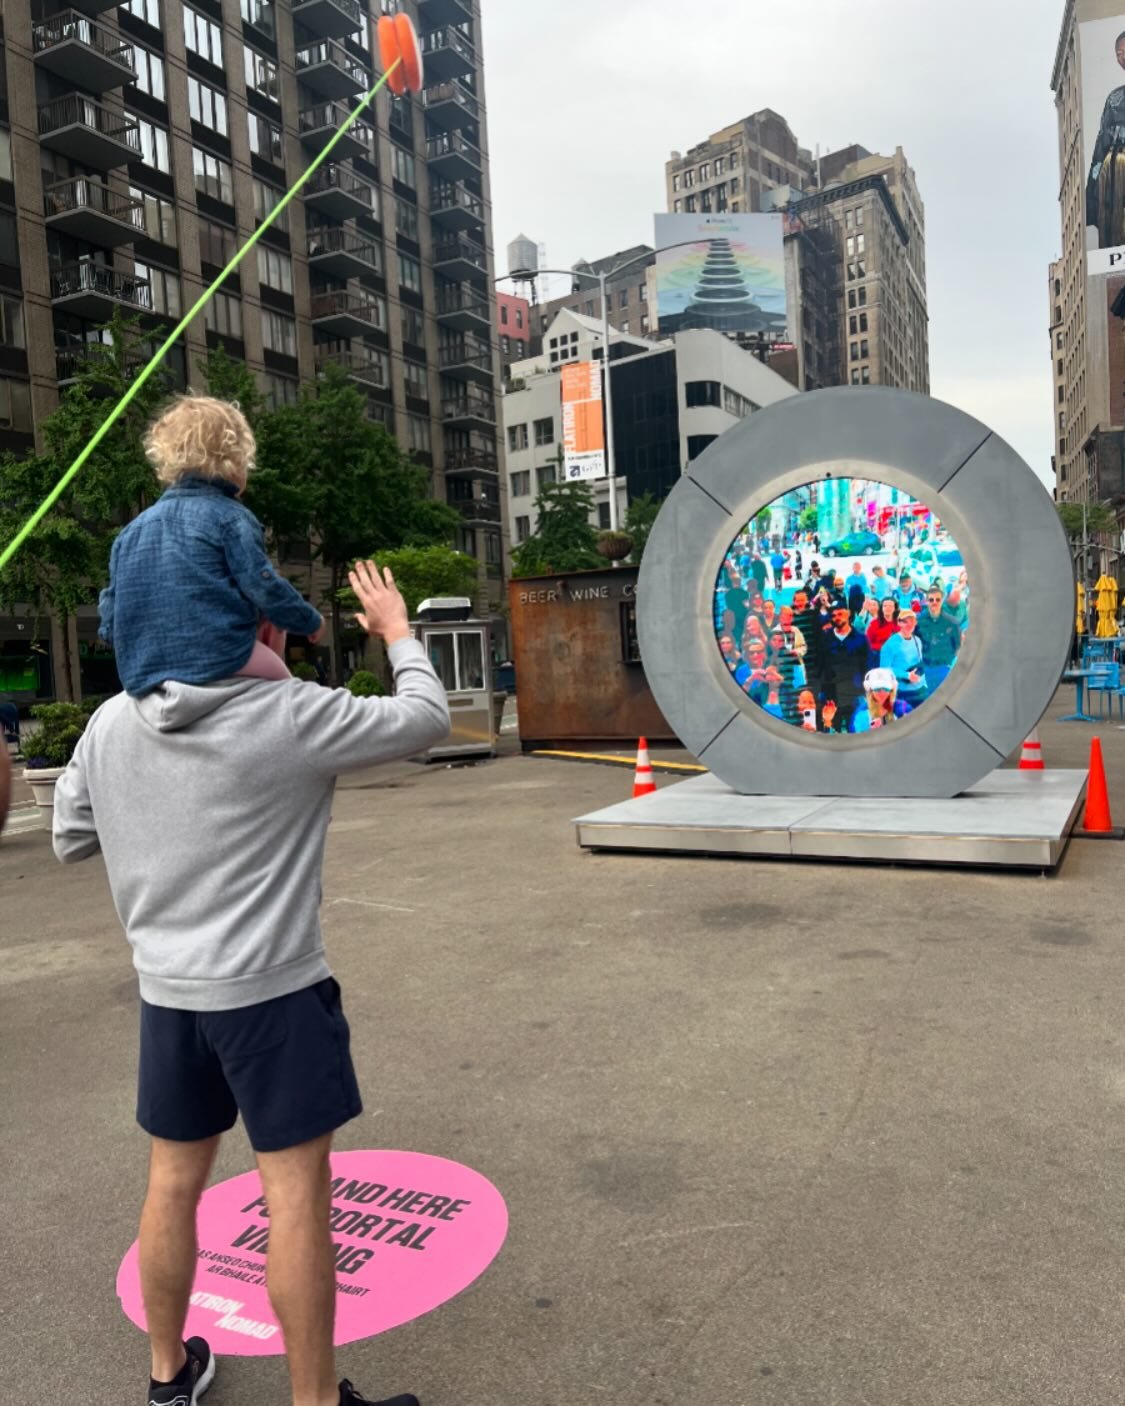 #jaywalking

Jay took his family to see &ldquo;The Portal&rdquo; this morning just steps from his home in Flatiron which is a new art installation next to the @Flatiron Buiilding that provides a live window between New York City and Dublin, Ireland. 